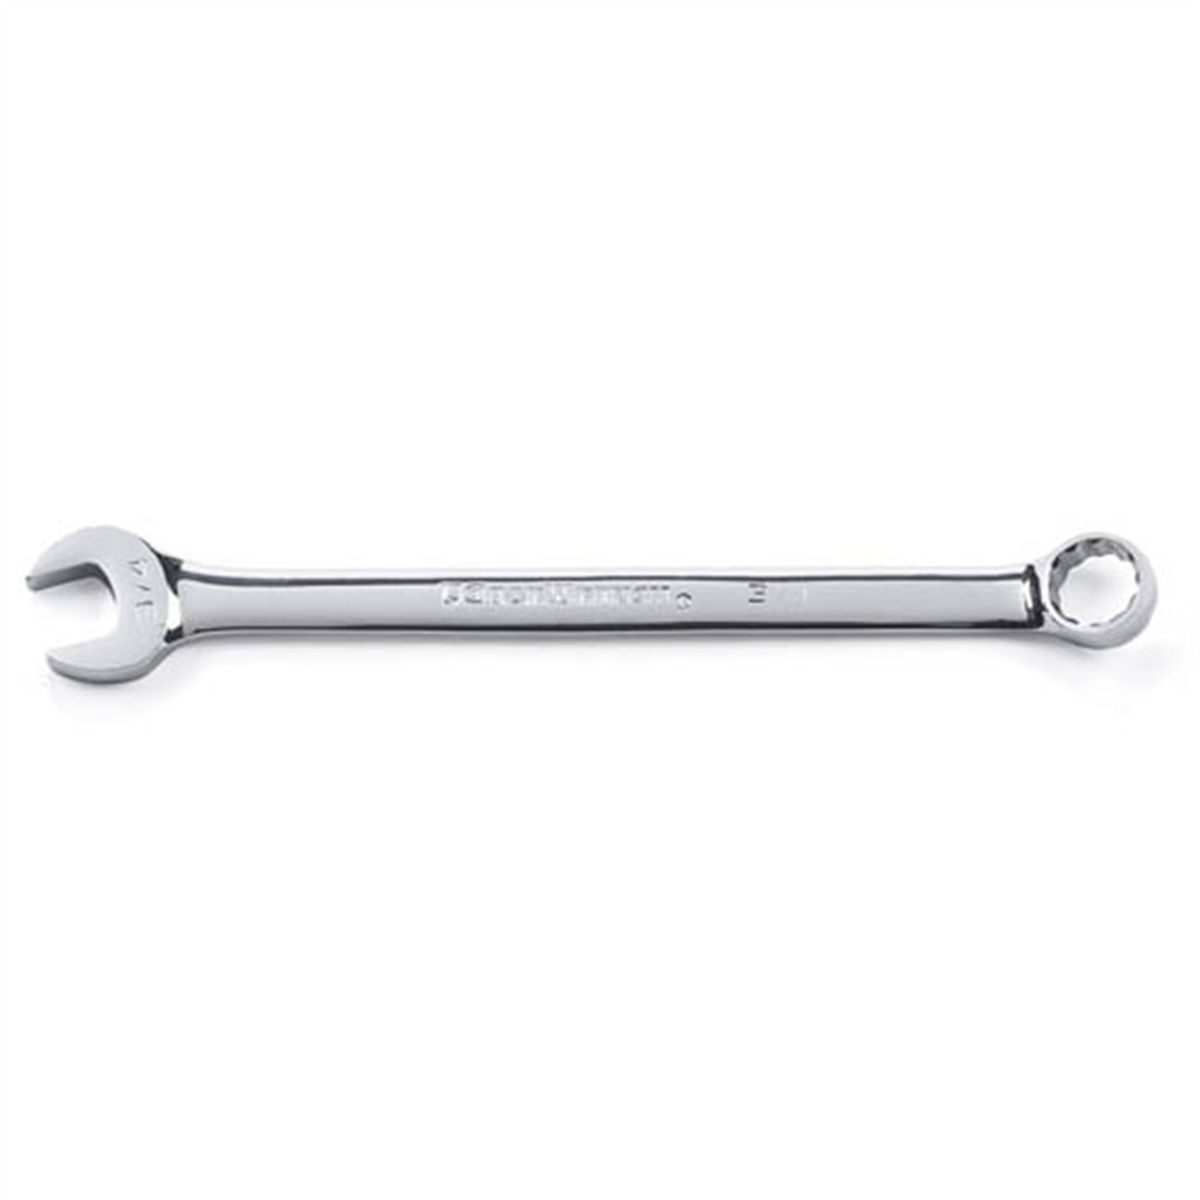 S-K Tools 8315 15mm 12-Point Chrome Combination Wrench SK *MADE IN THE USA*